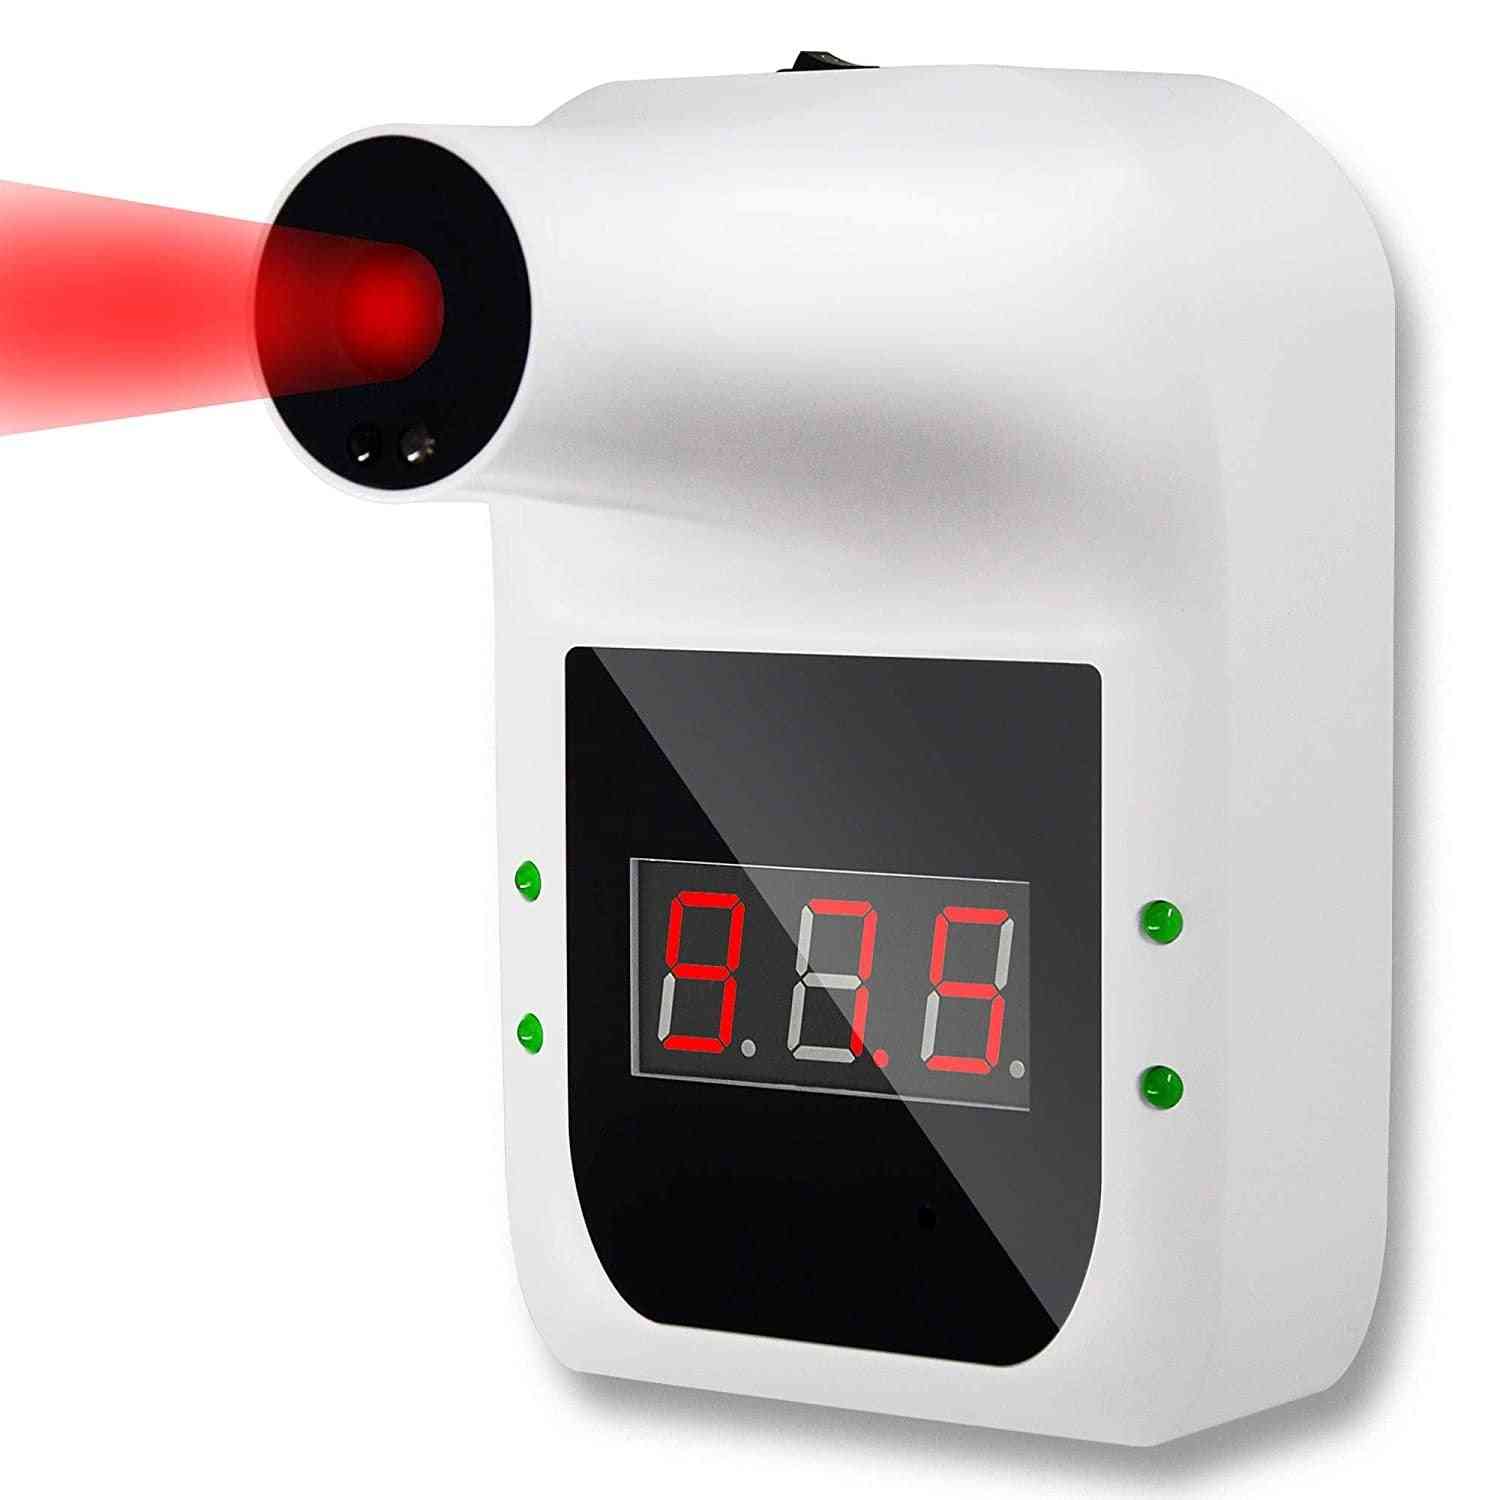 Lcd Display Wall-mounted Infrared Thermometer